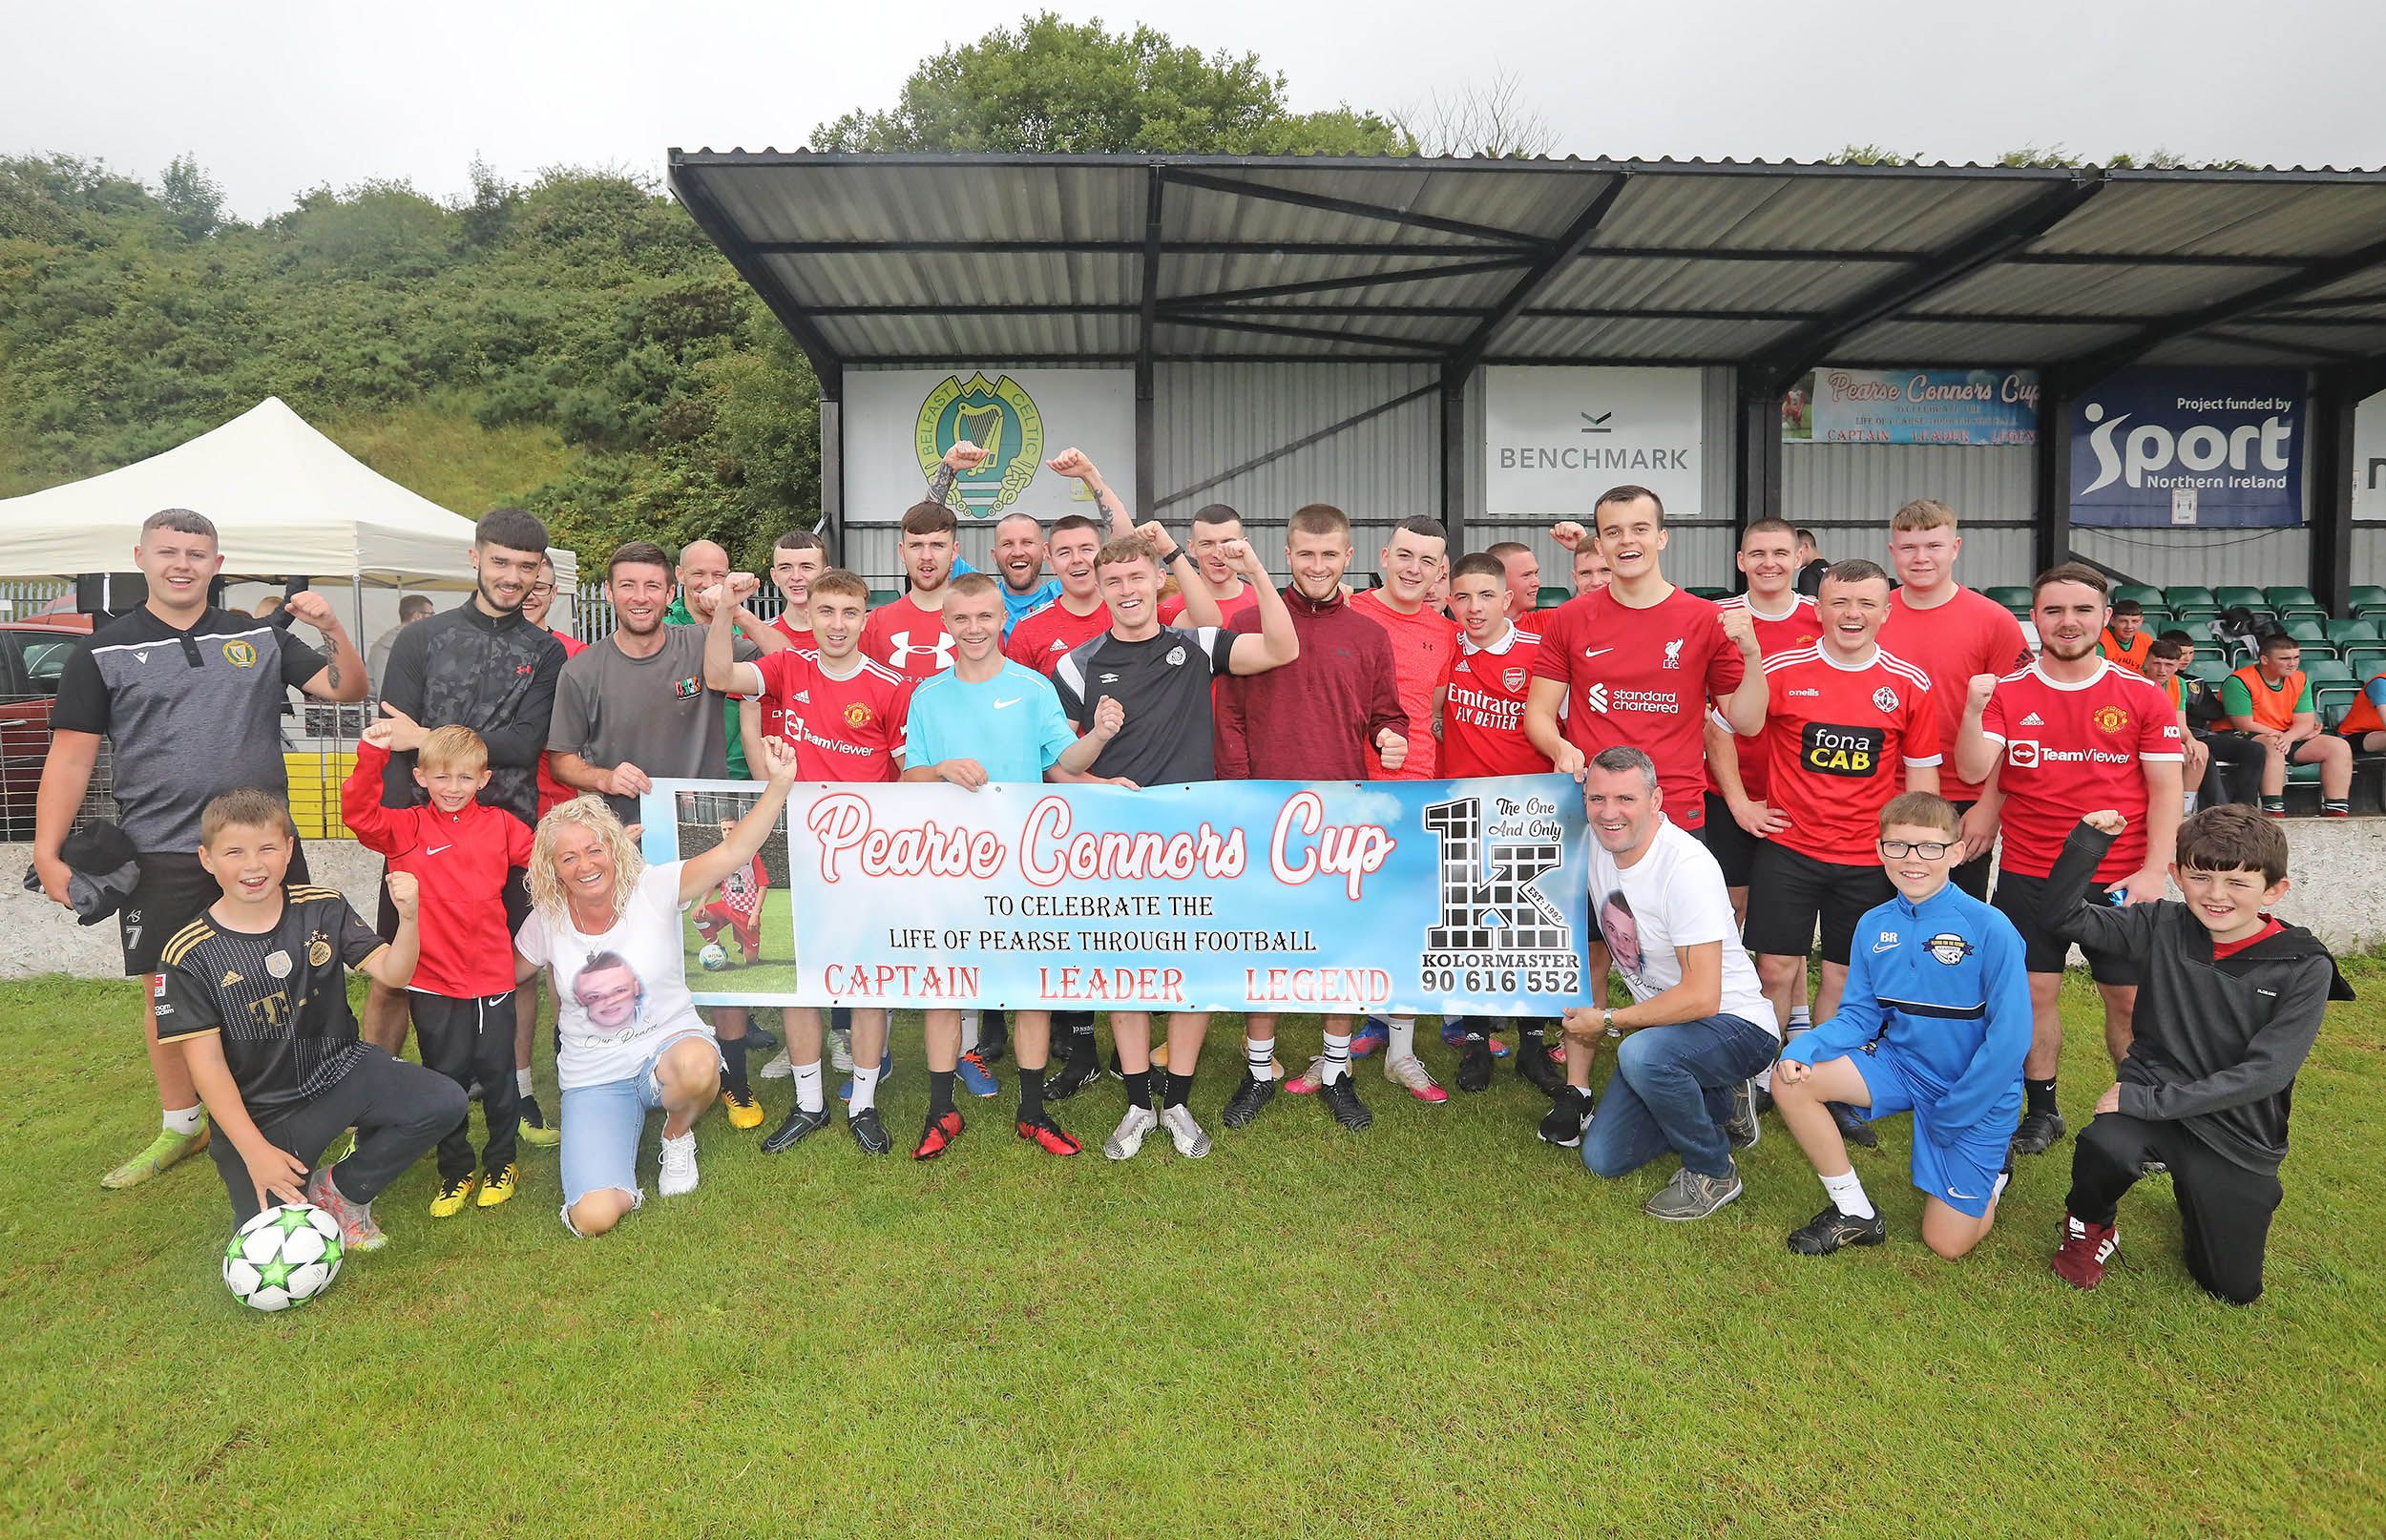 MEMORIAL: The family of Pearse Connors joined his friends for a football tournament in his memory